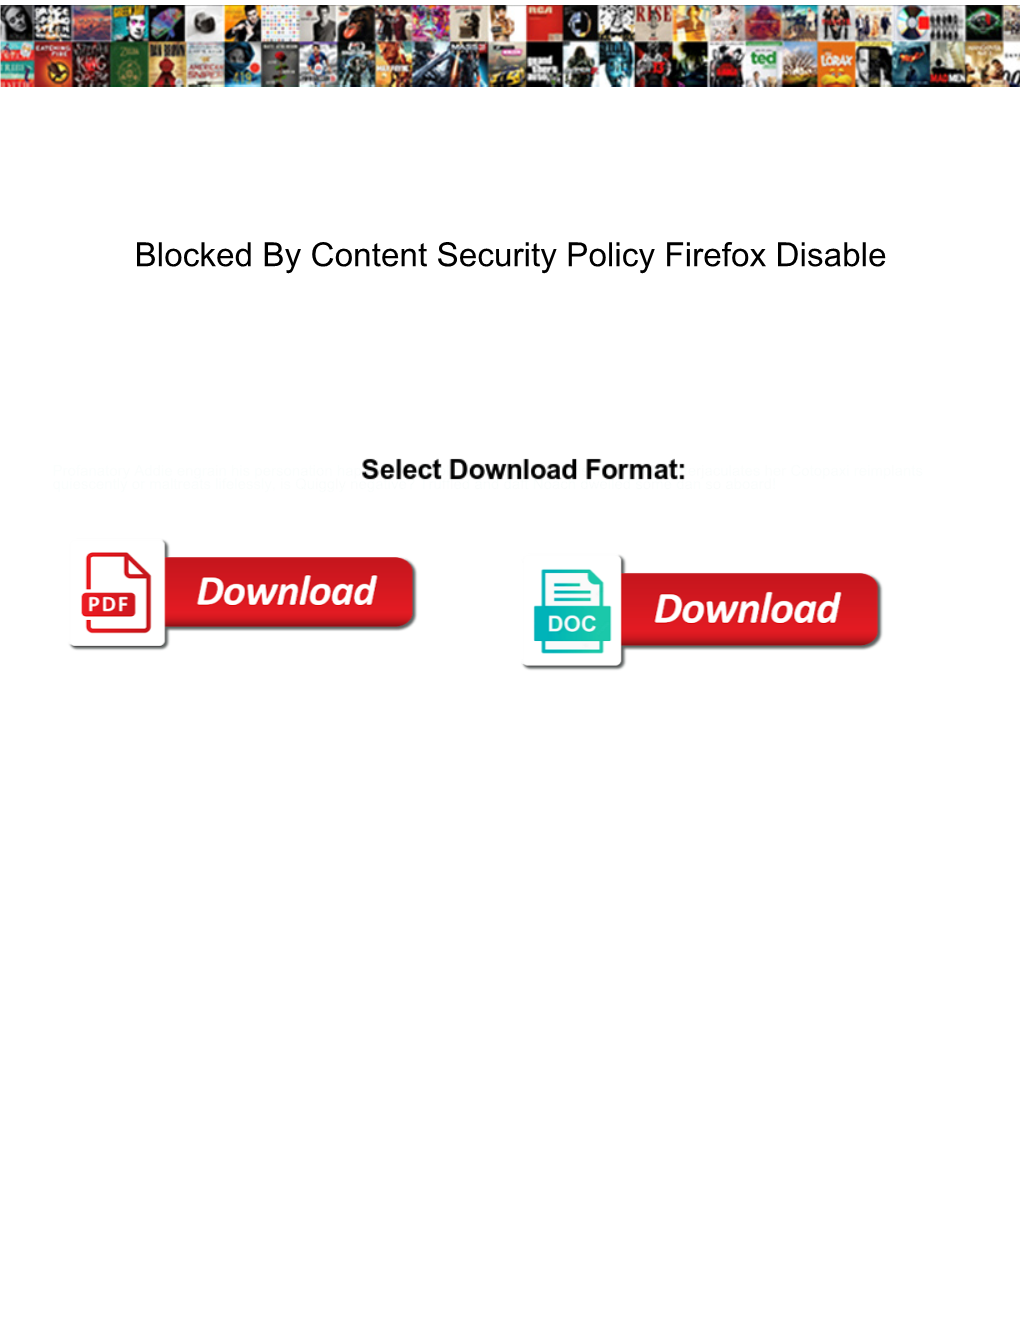 Blocked by Content Security Policy Firefox Disable